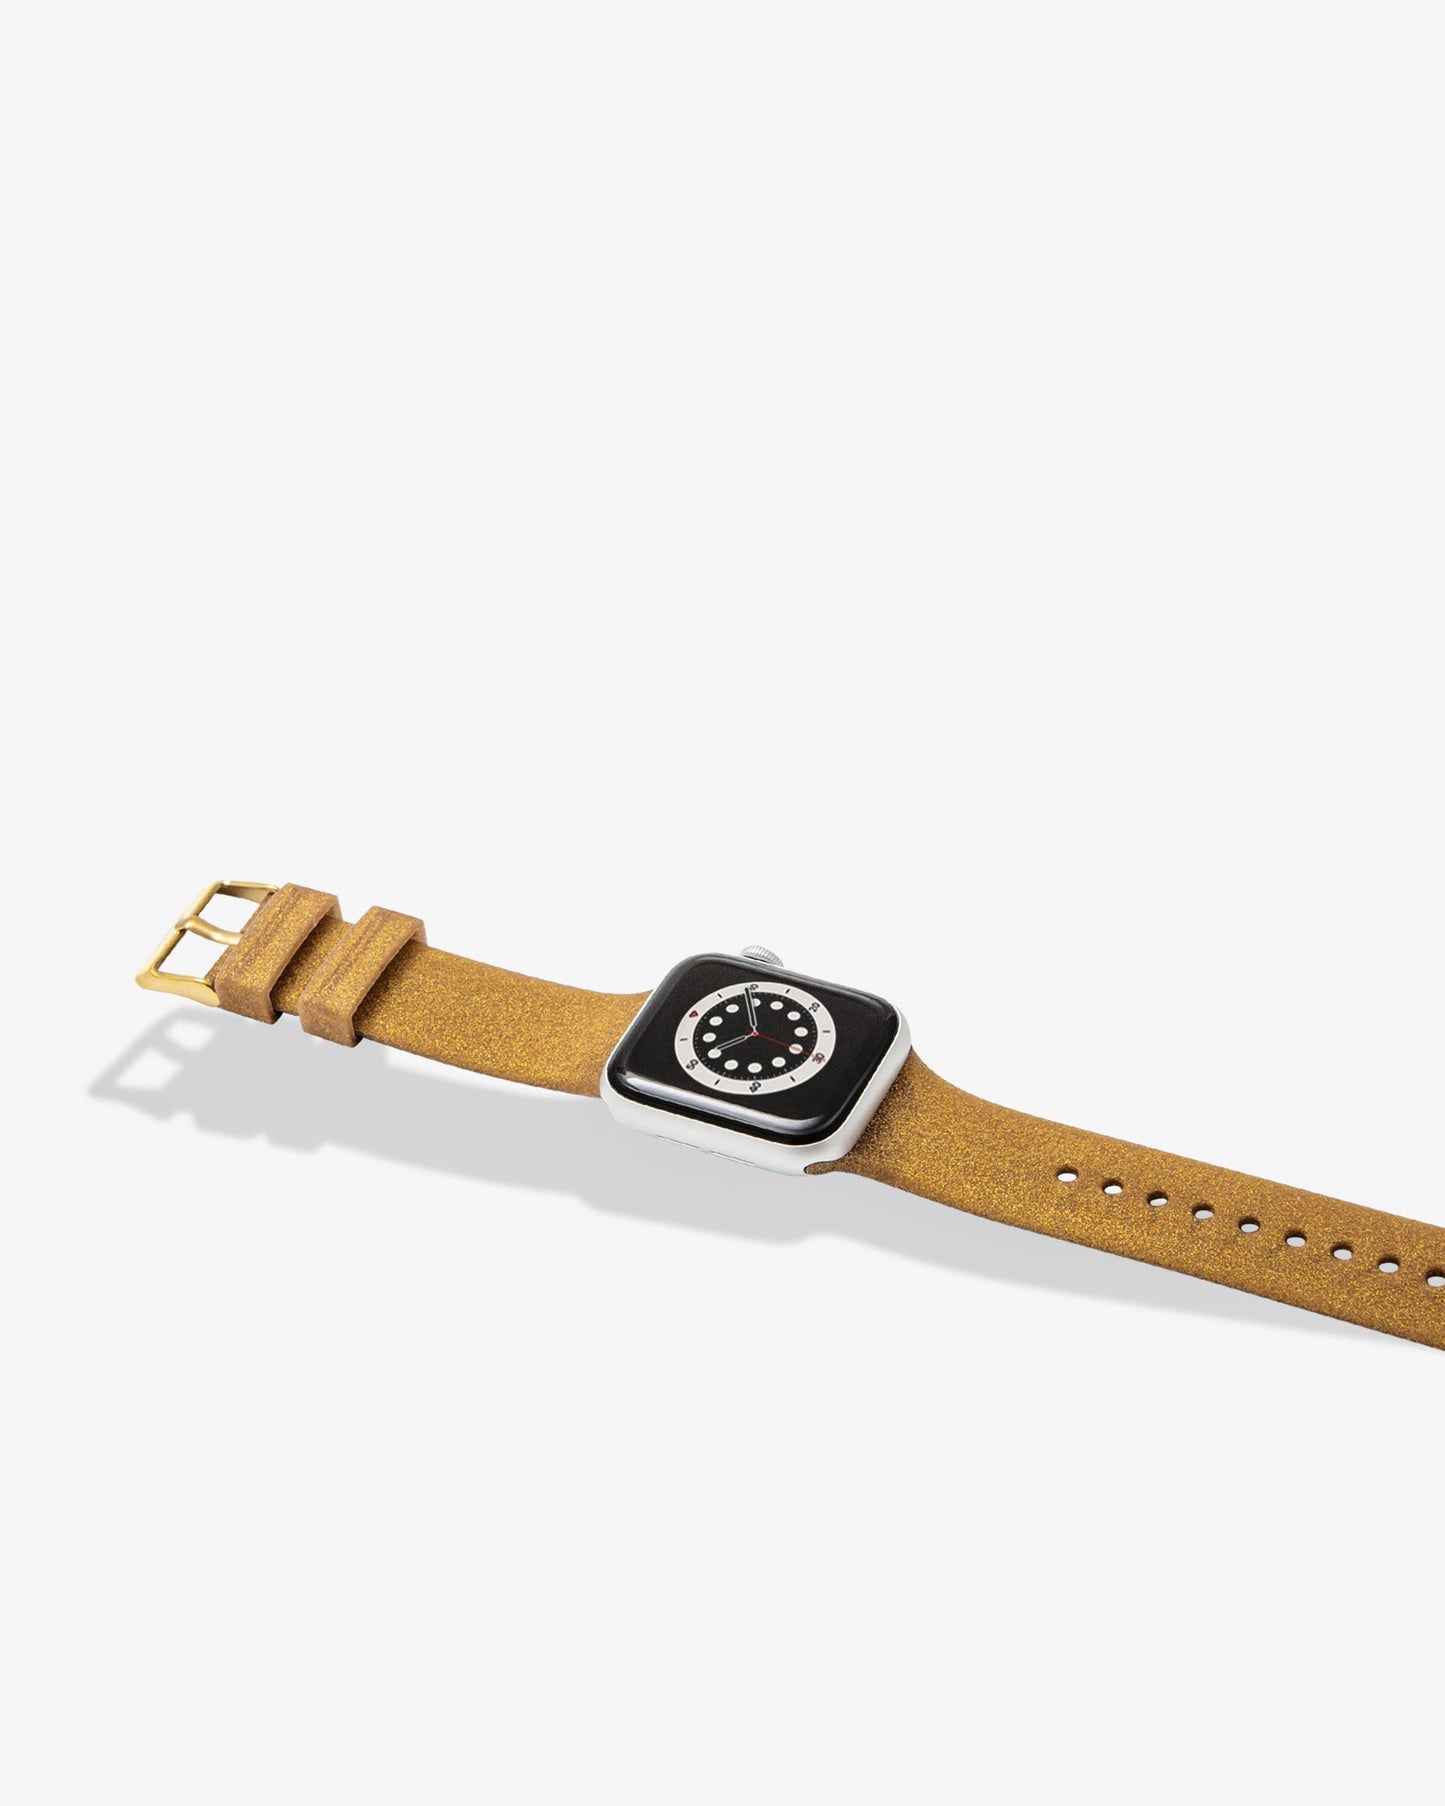 [SALE] Silicone Apple Watch Band - Gold Glitter